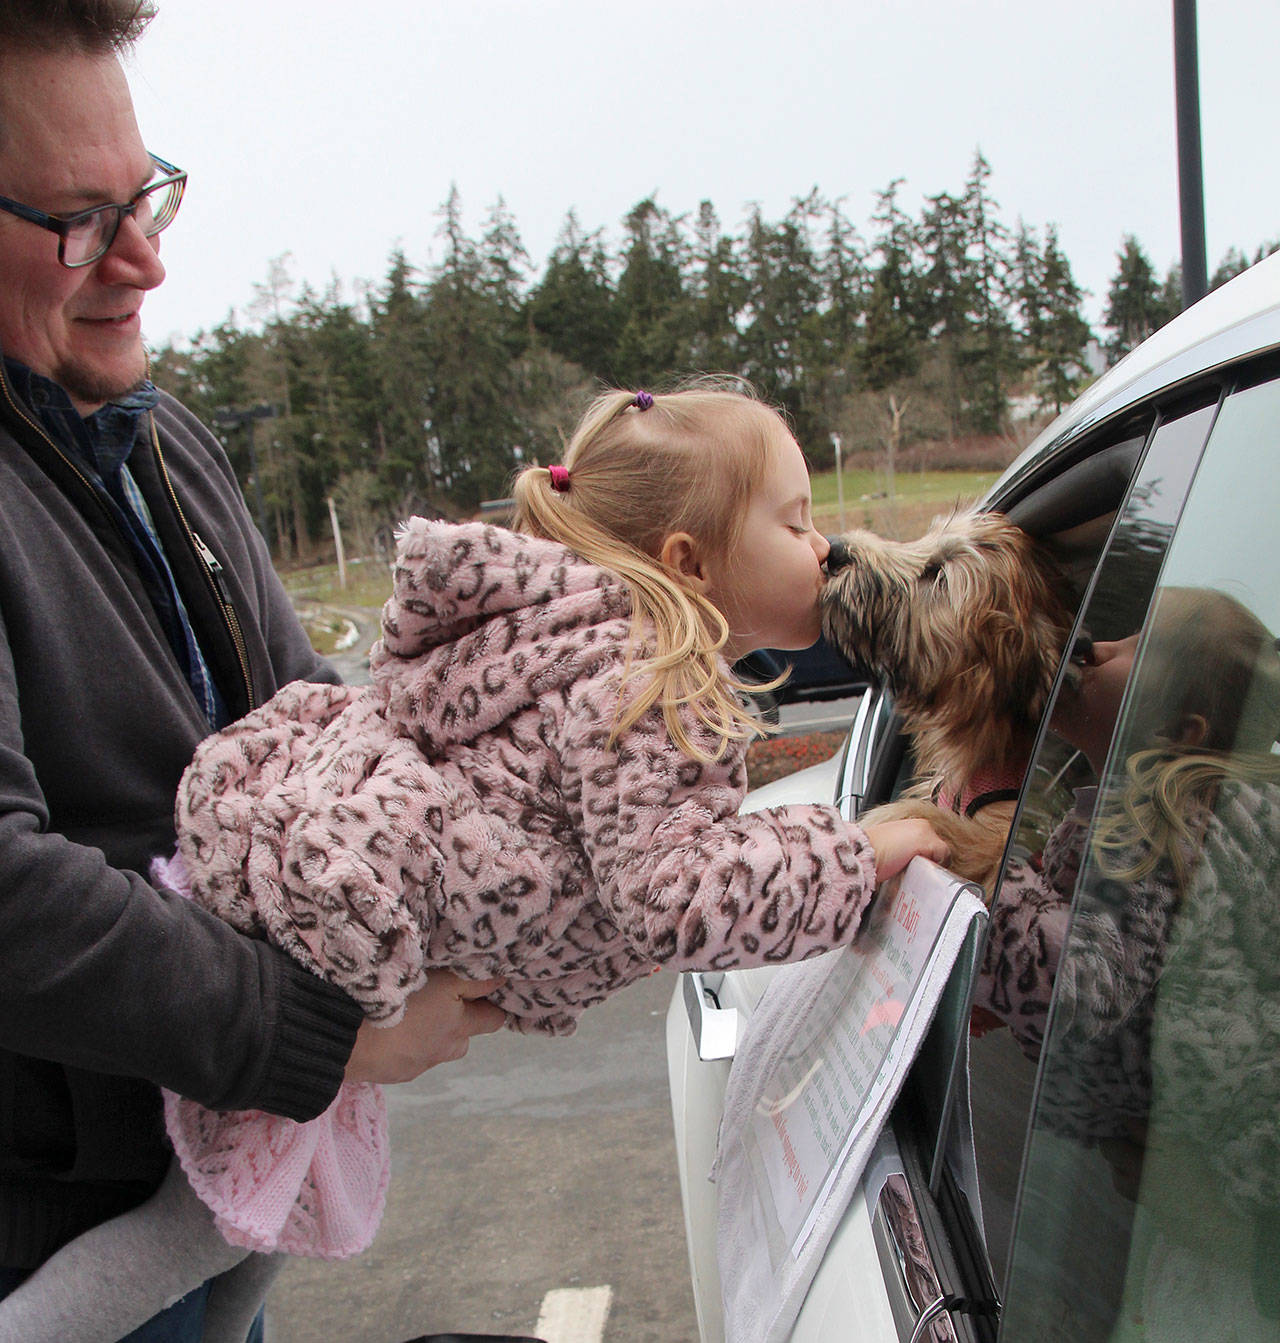 Piper Hedrick leans in for a smooch with popular pooch Katy. Her father, Colin, holds his 3-year-old daughter as she greets Katy.“She loves puppies,” Colin said. He said Piper is good at greeting dogs properly, by holding her hand out gently first for it to sniff. His wife Erin works at Starbucks. (Photos by Maria Matson/Whidbey News-Times)